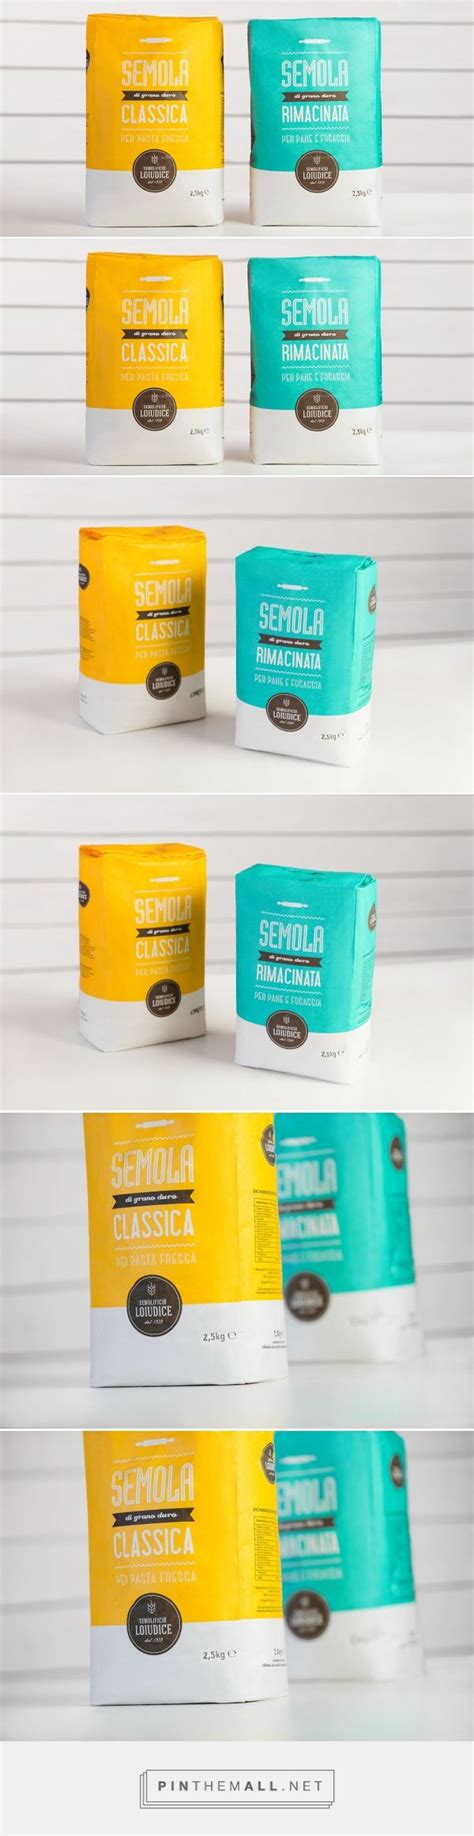 Flour Pack Loiudice — The Dieline Branding And Packaging A Grouped